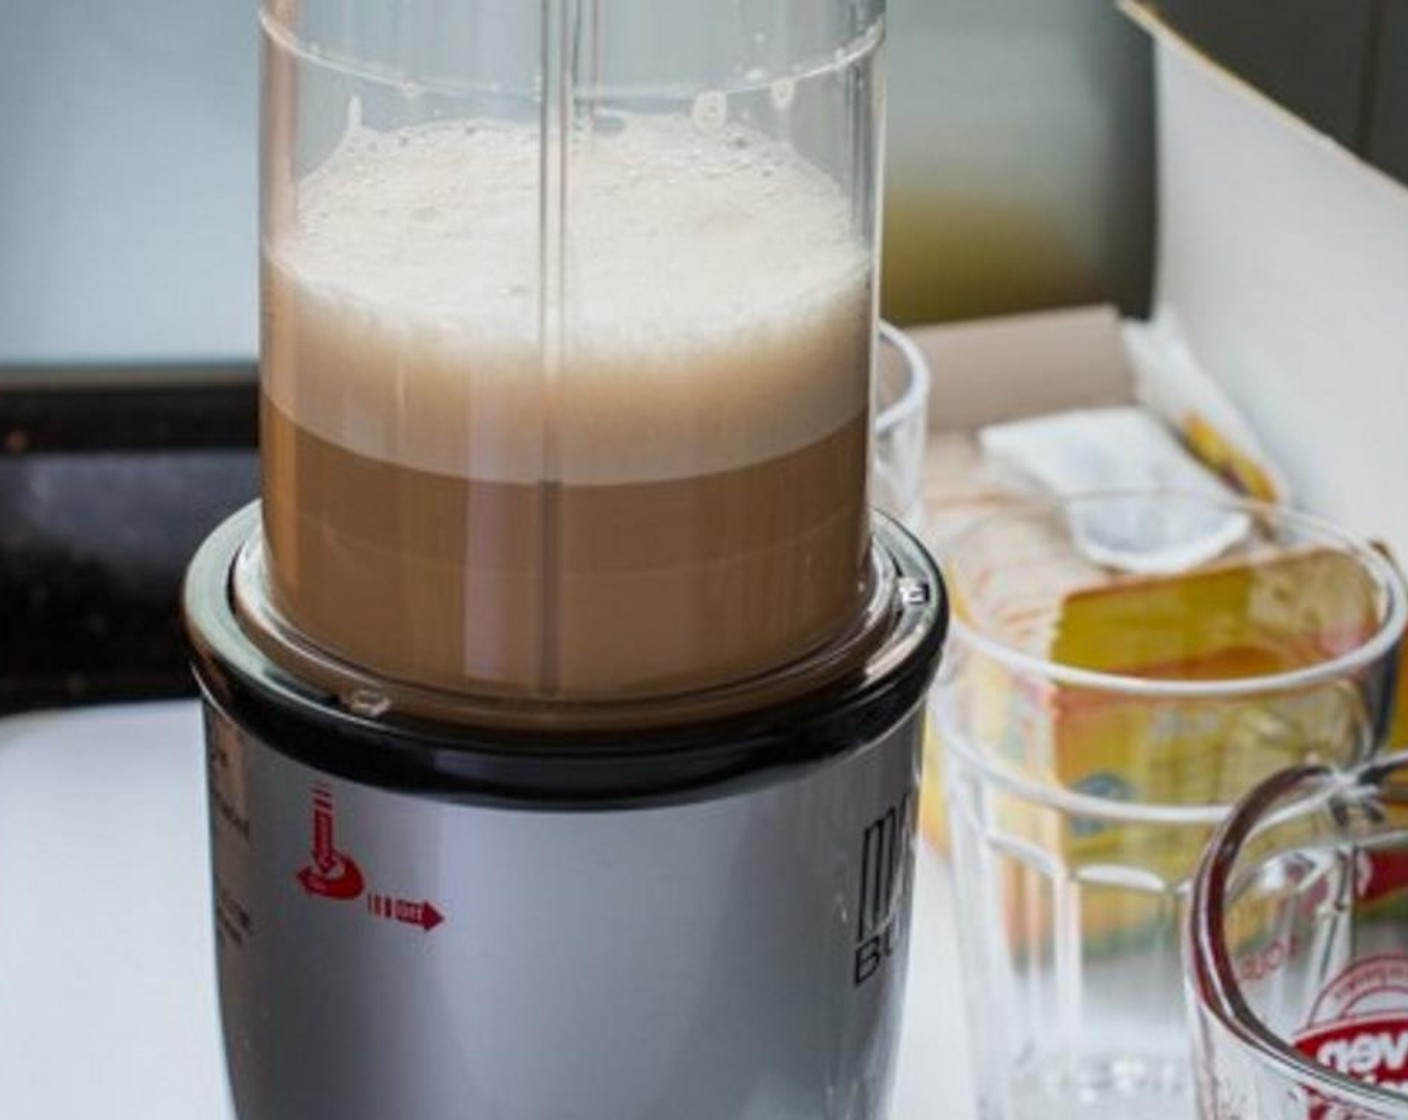 step 3 Blend the tea in a blender for a few seconds to achieve a froth.